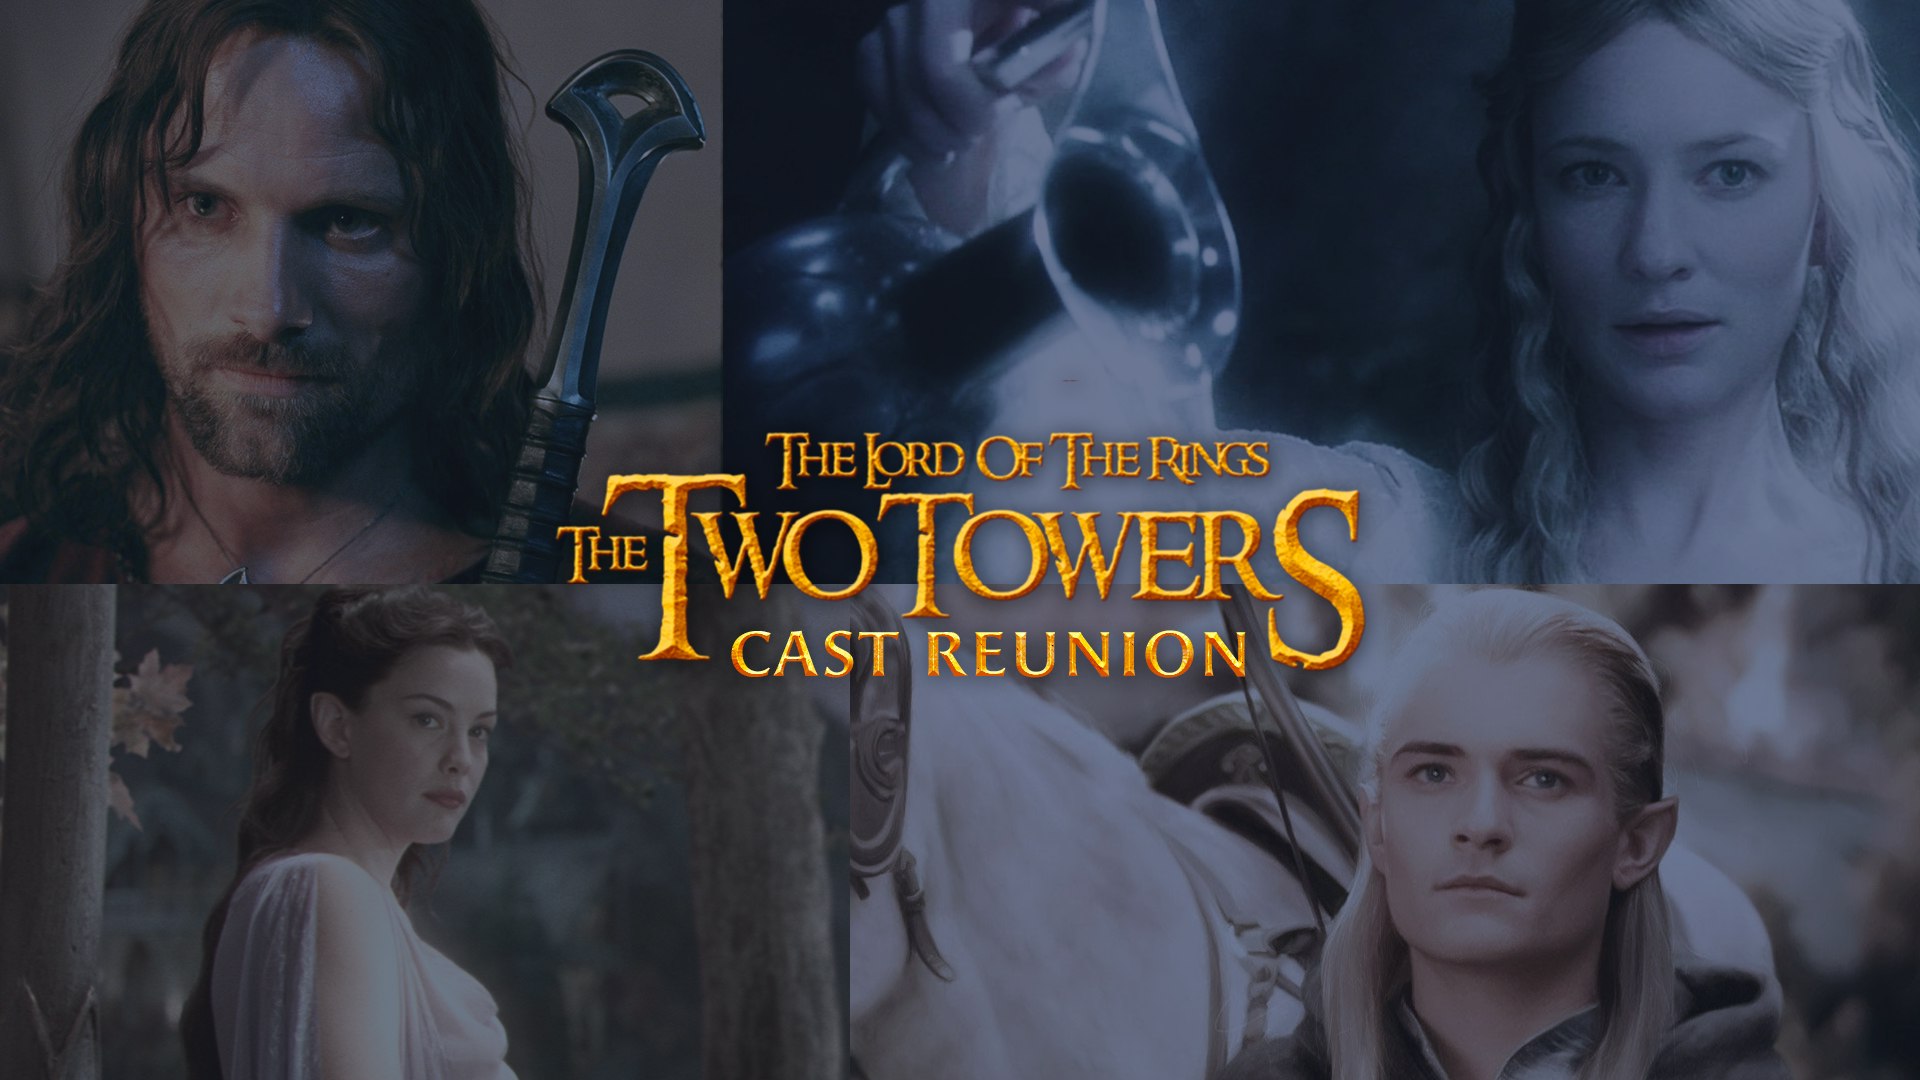 Premiere Theaters - Oaks 10 - Lord of the Rings: The Two Towers